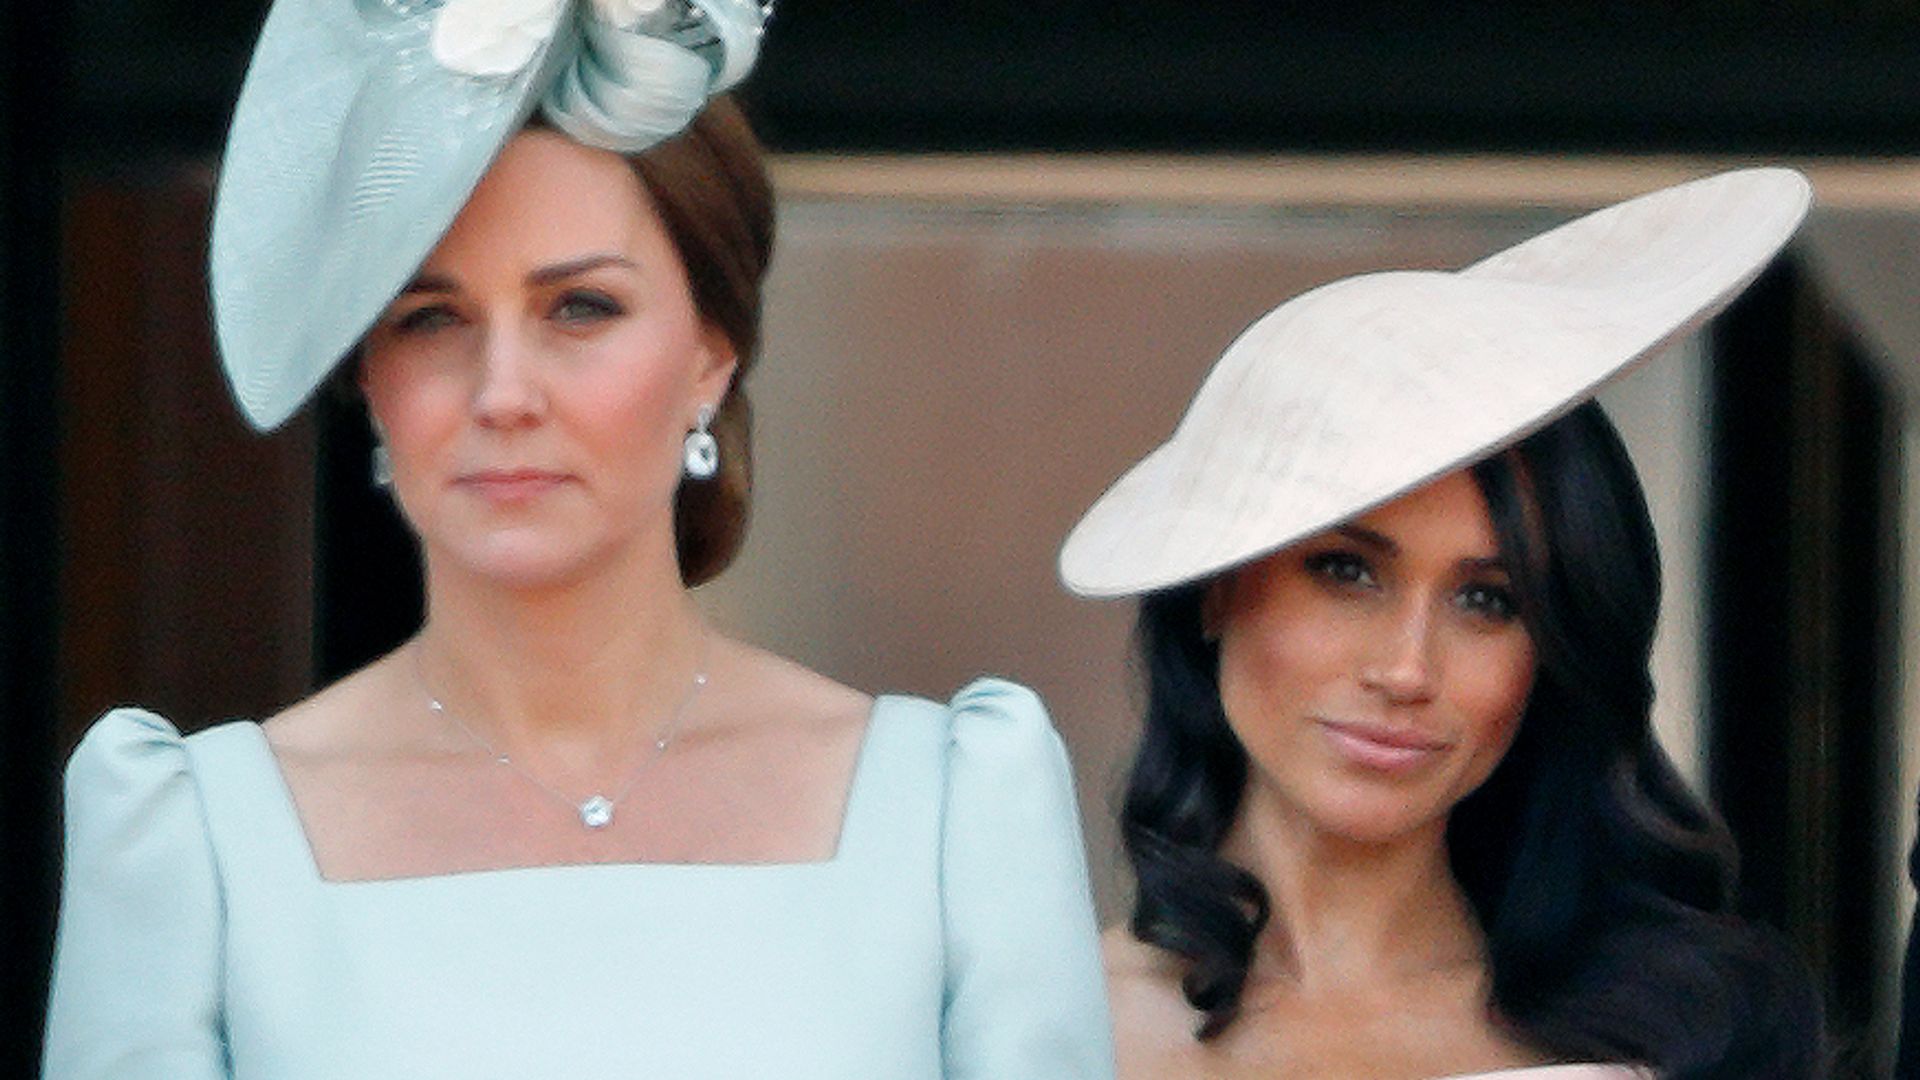 Kate Middleton in a blue dress standing in front of Meghan Markle in a pink dress at Trooping The Colour 2018